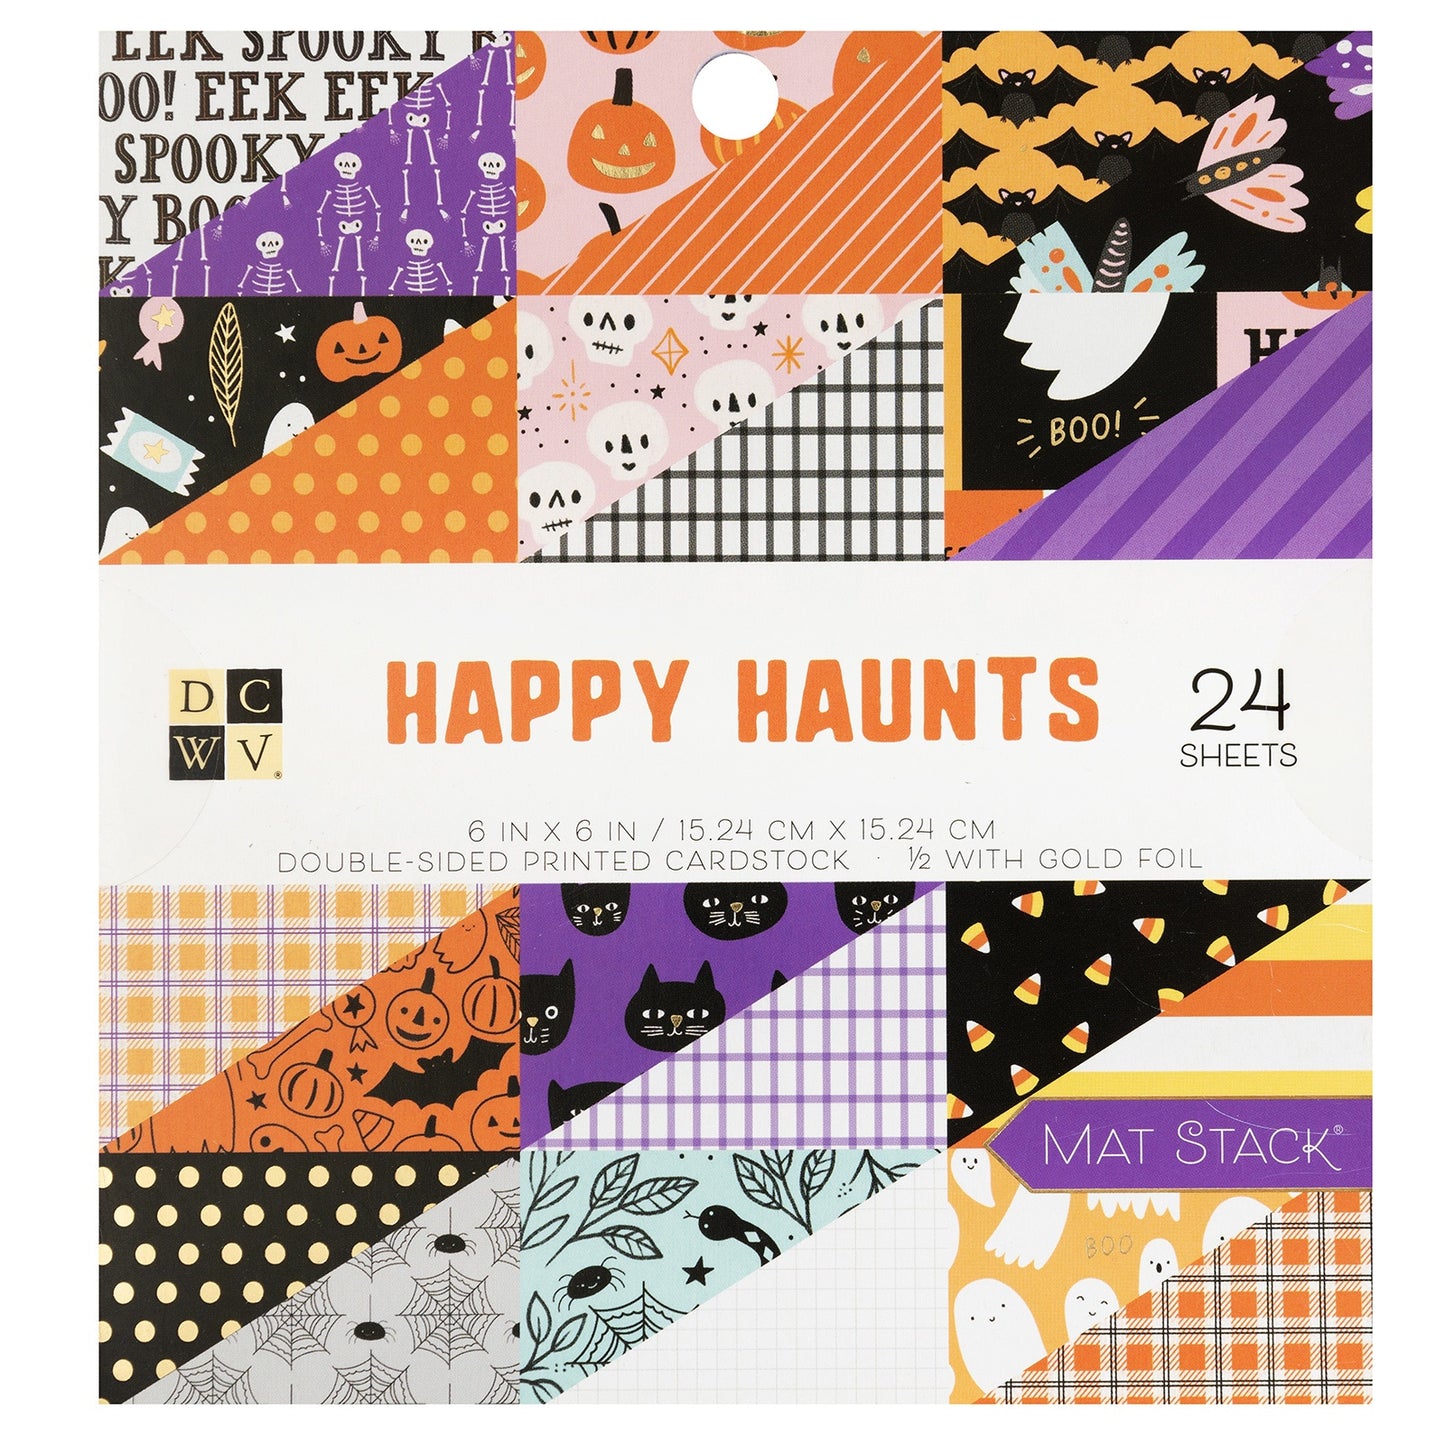 DCWV Double-Sided Cardstock Stack 6"X6" 24/Pkg-Happy Haunts, W/Copper Foil